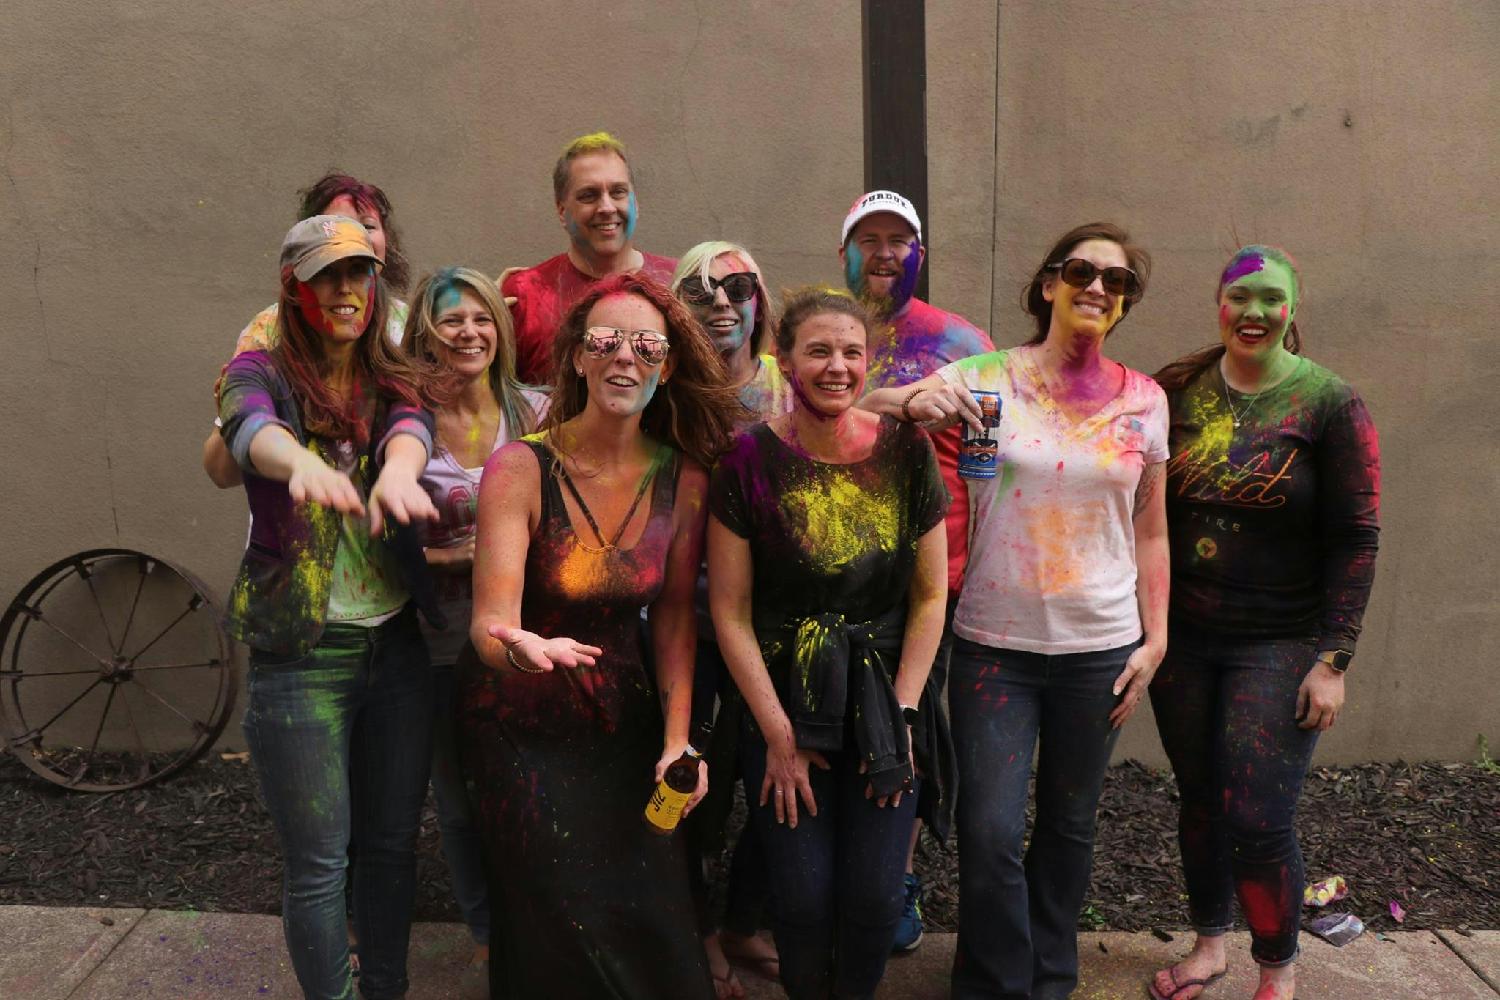 We celebrated Holi - the Hindu festival of colors - at our Lafayette office.